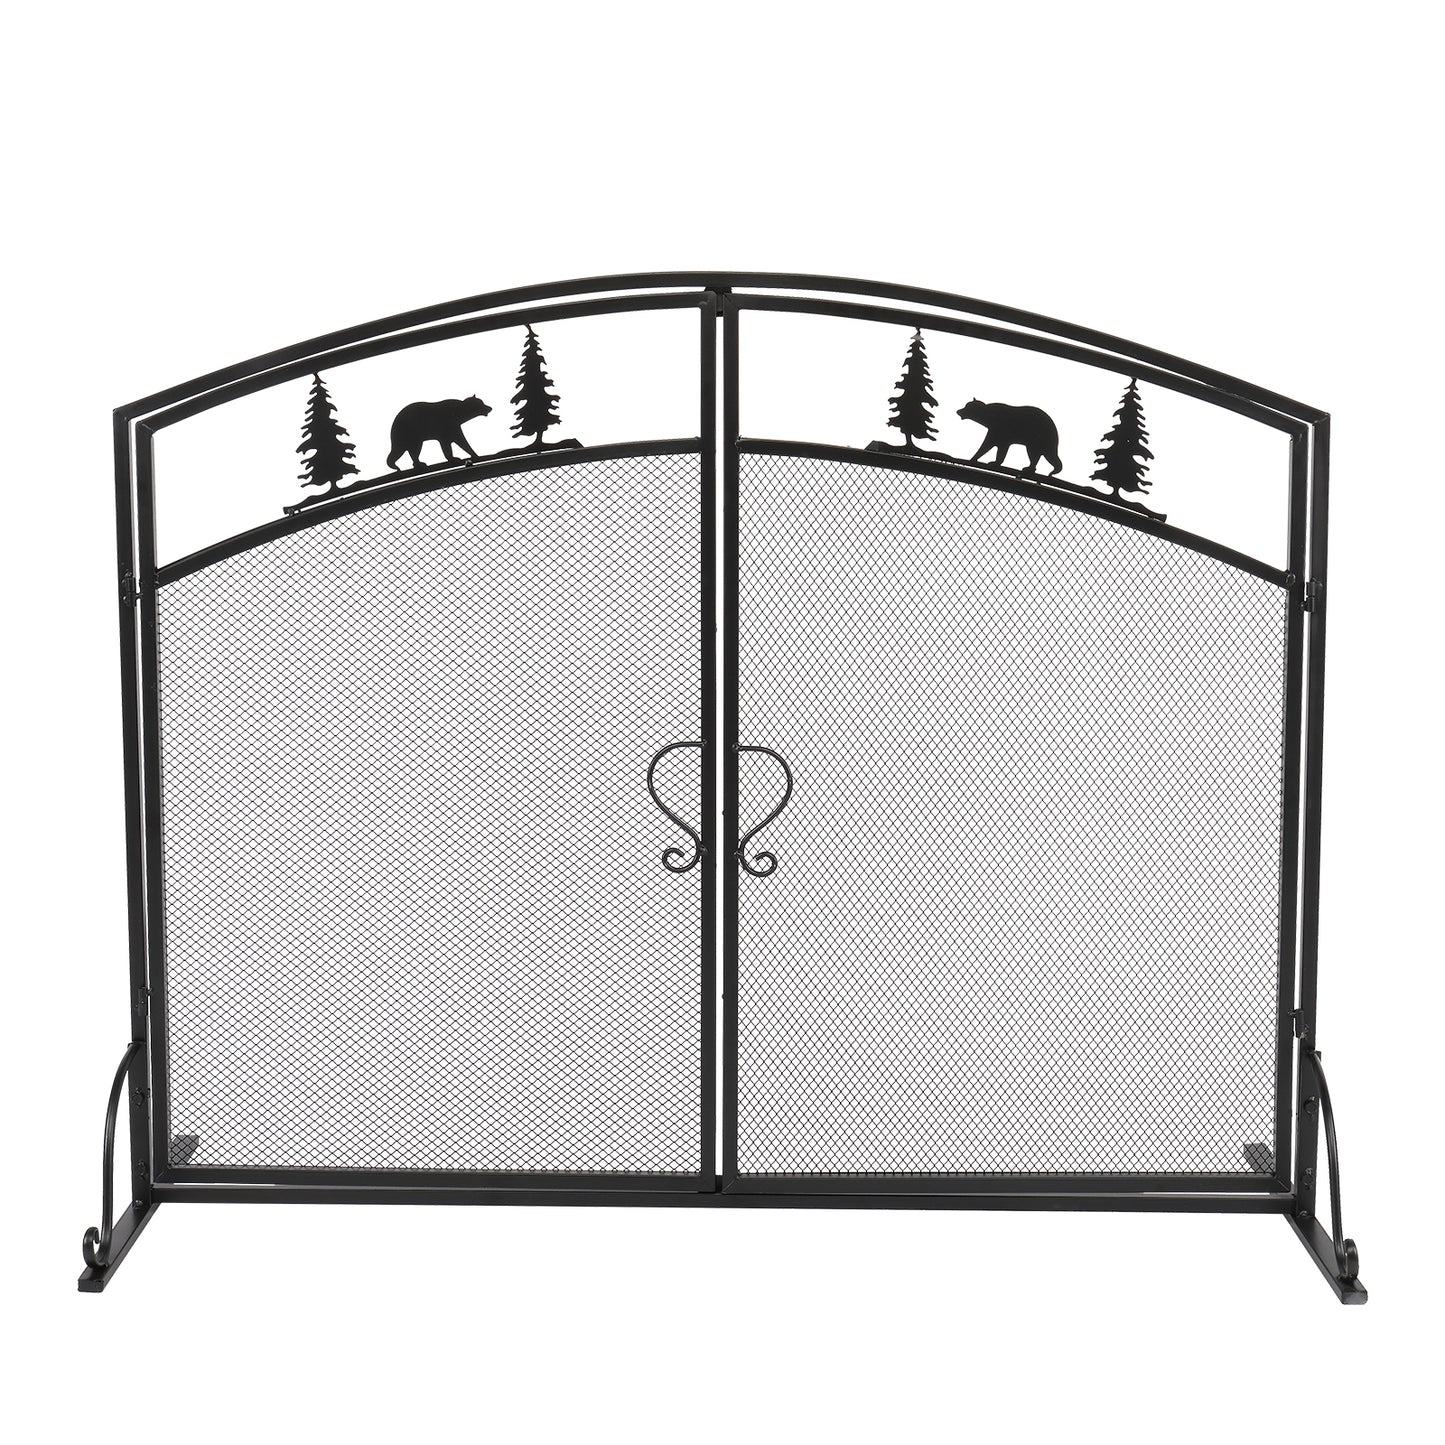 Double-door Curved Christmas Tree Decoration Fireplace Screen (99 x 34.5 x 79)cm